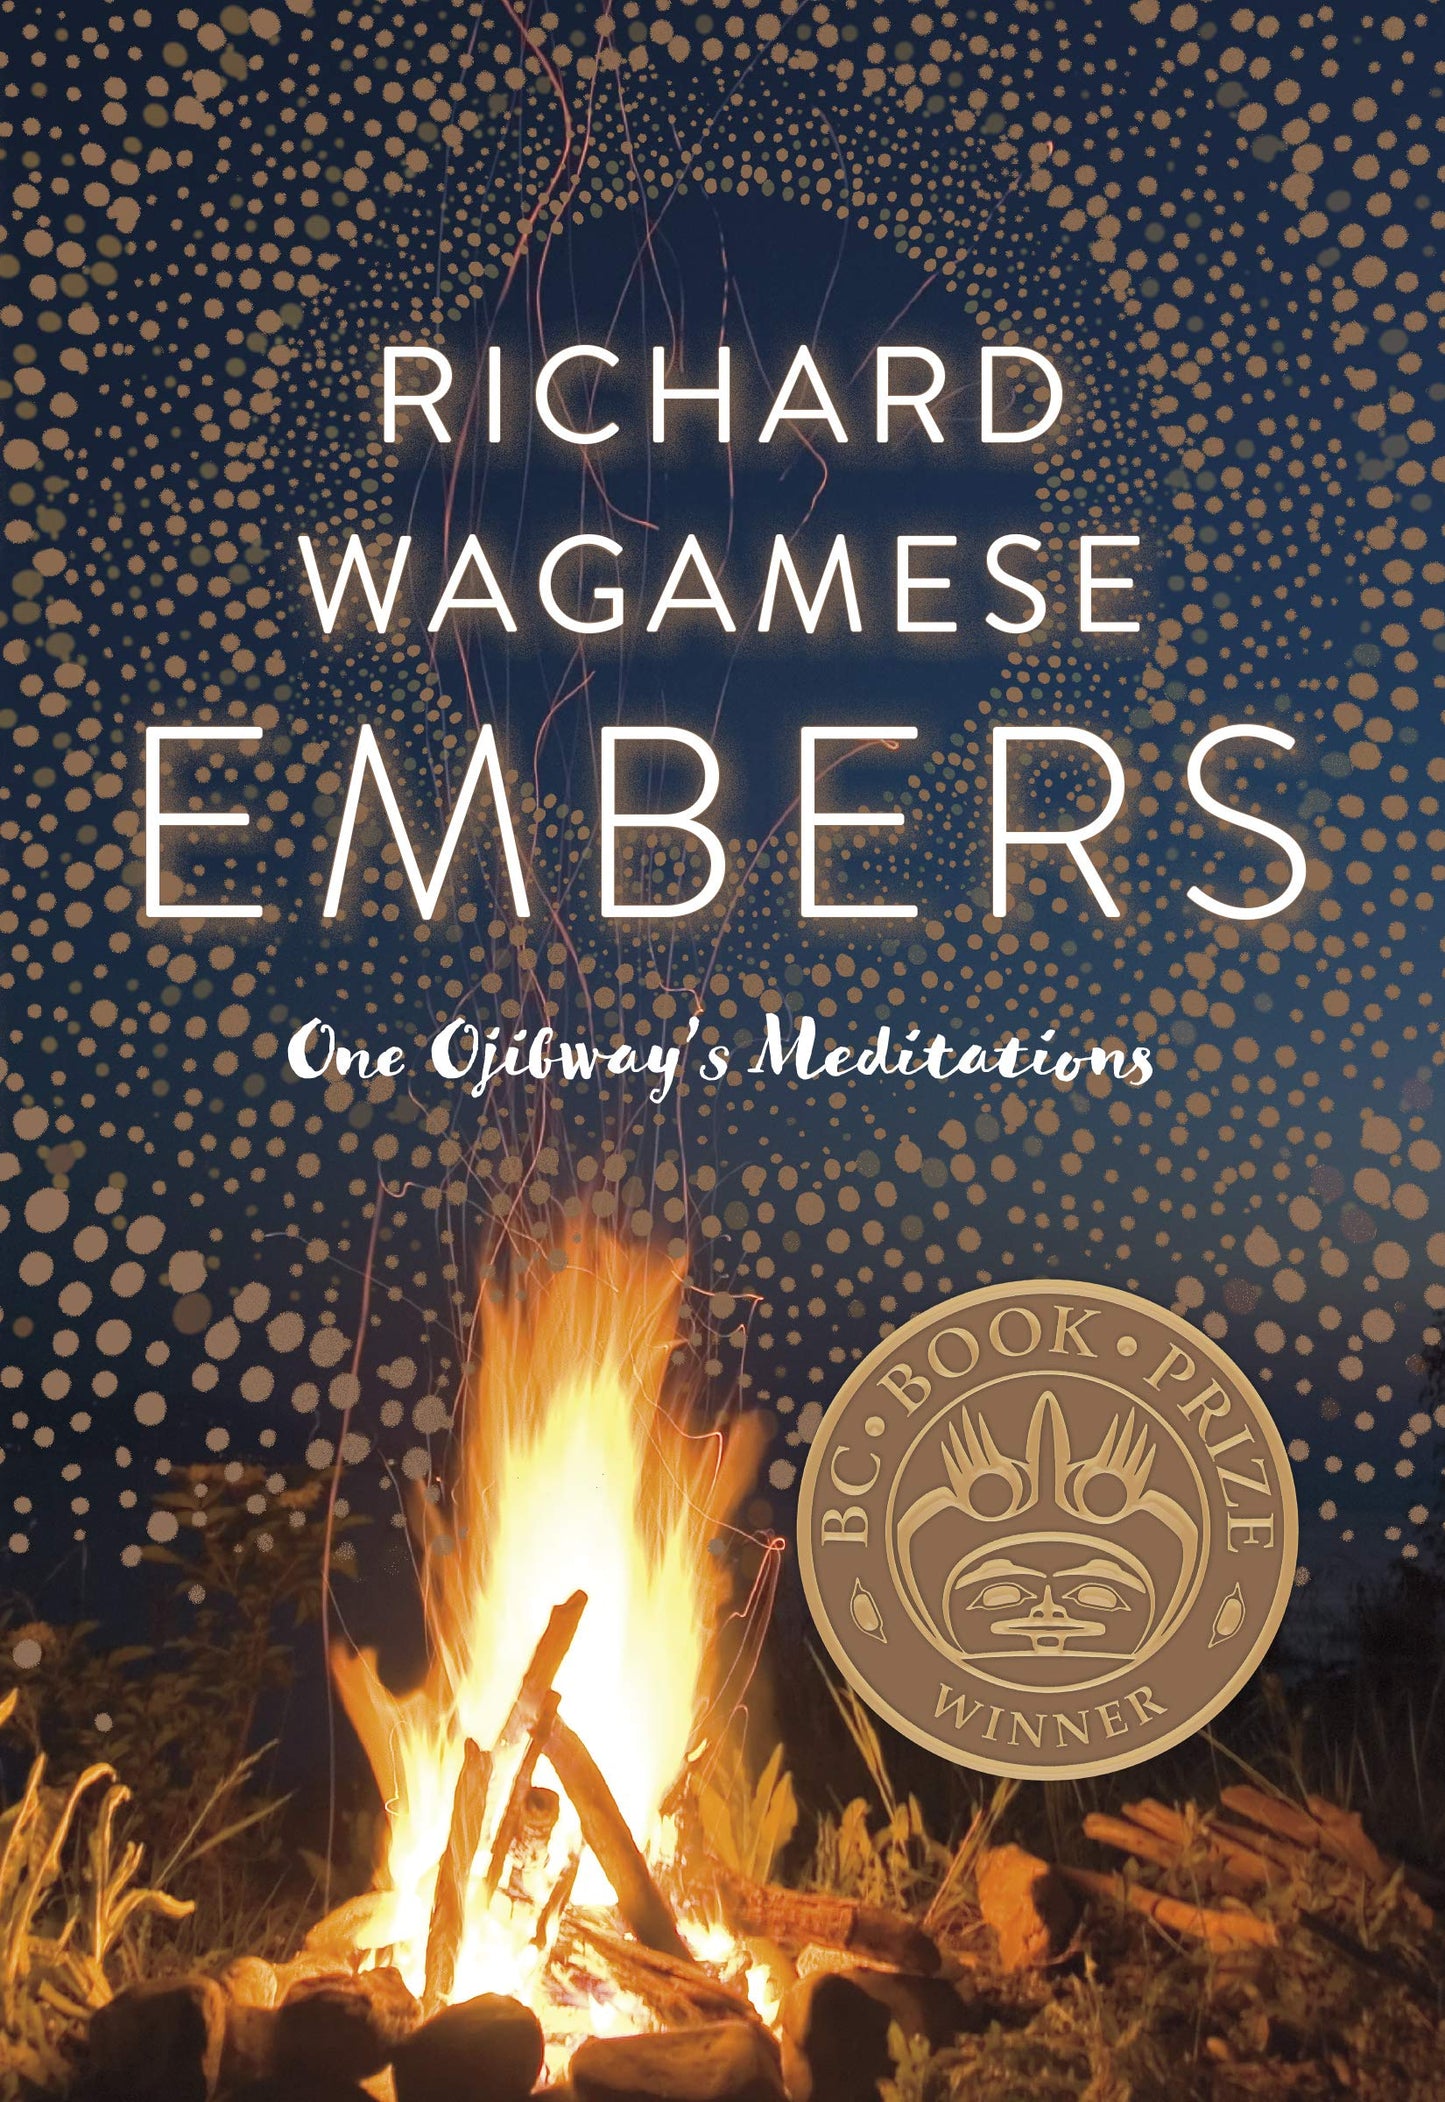 Embers richard wagamese reflections meditations lessons sublim universe bush sawing cutting stacking wood winter smudge indigenous honest evocative articulate grief joy recovery beauty gratitude physicality spirituality ojibway mindfulness first nations books book